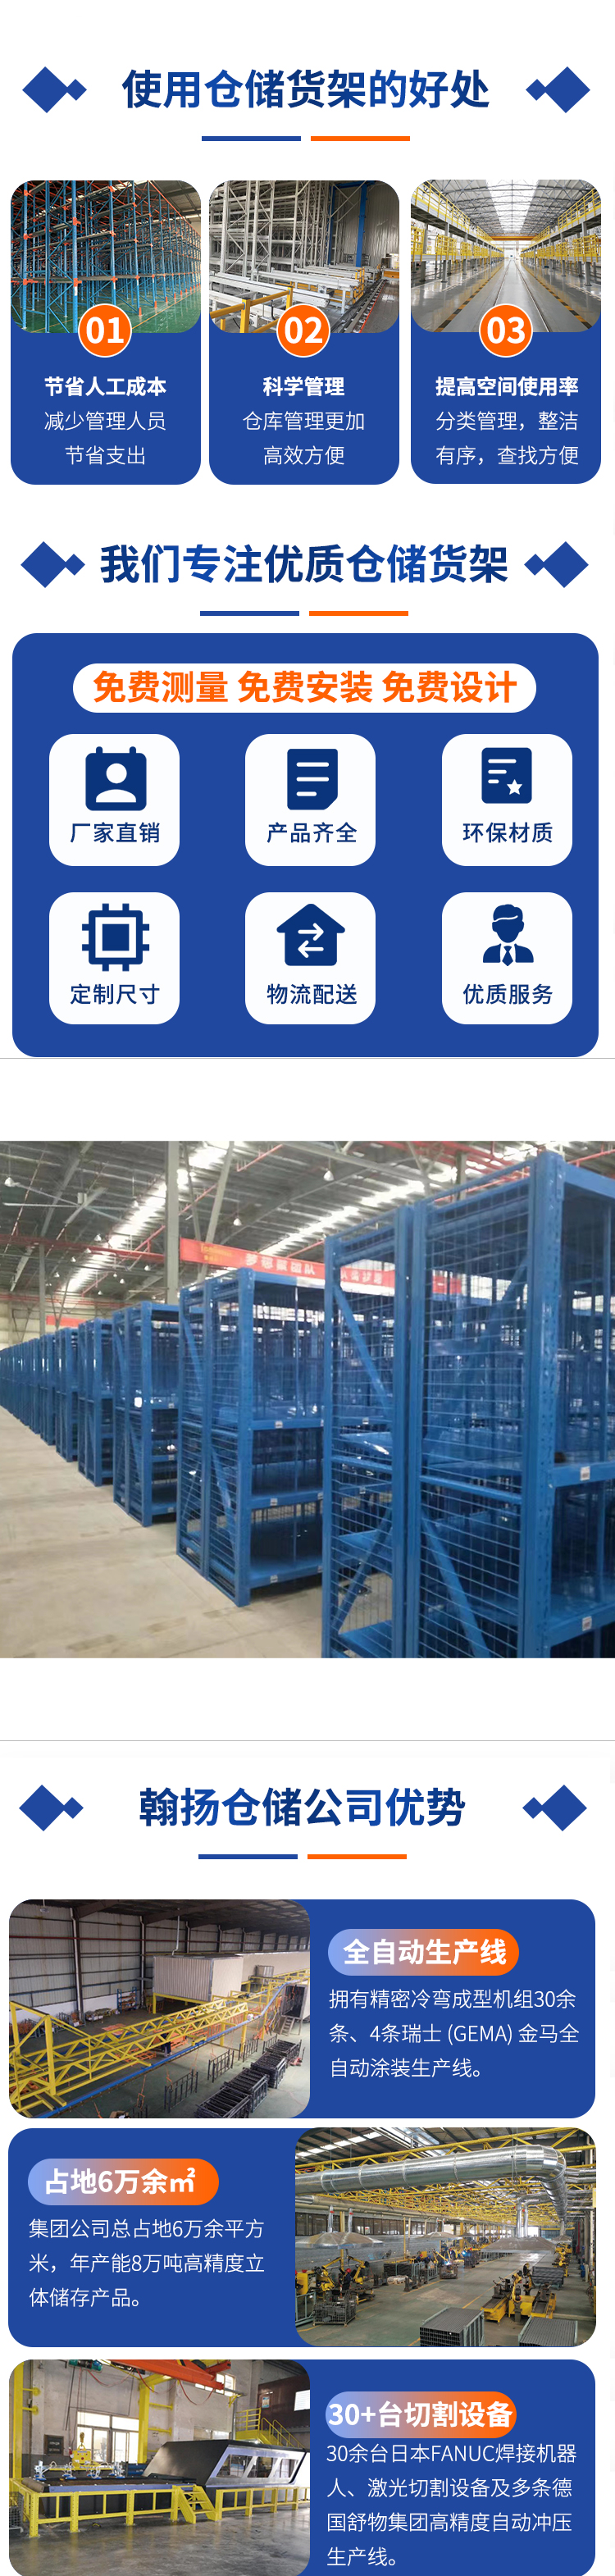 Hanyang Cold Storage Shuttle Shelves, Pallets, Corridors, and Customized Heavy Warehousing for Visiting the Site